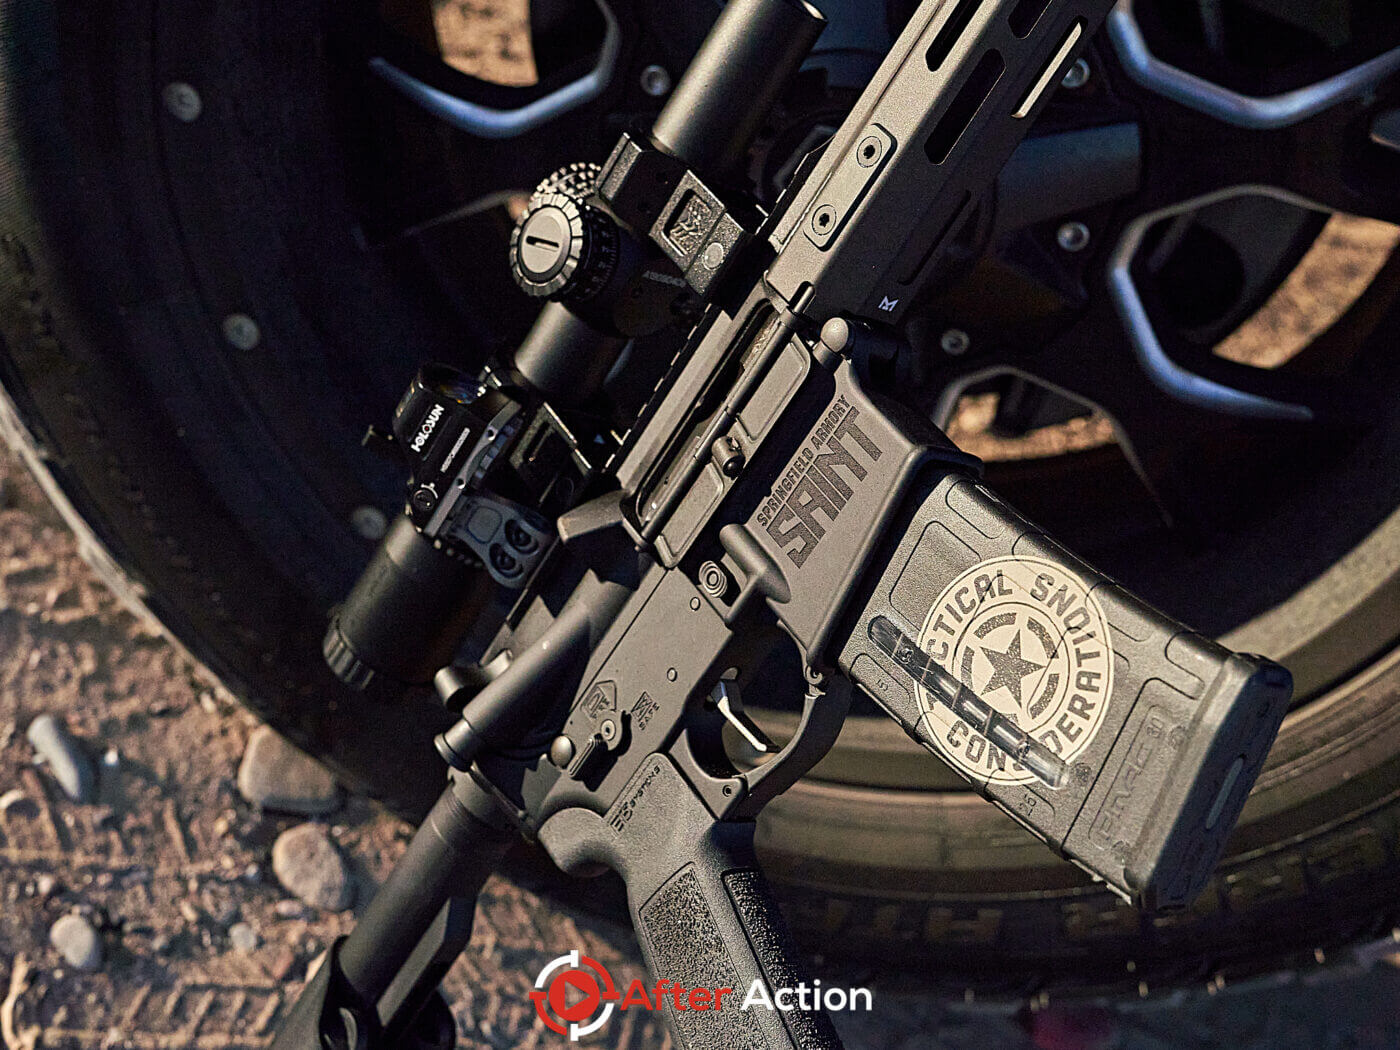 Valhalla Rukh mounted on Springfield Armory AR-15